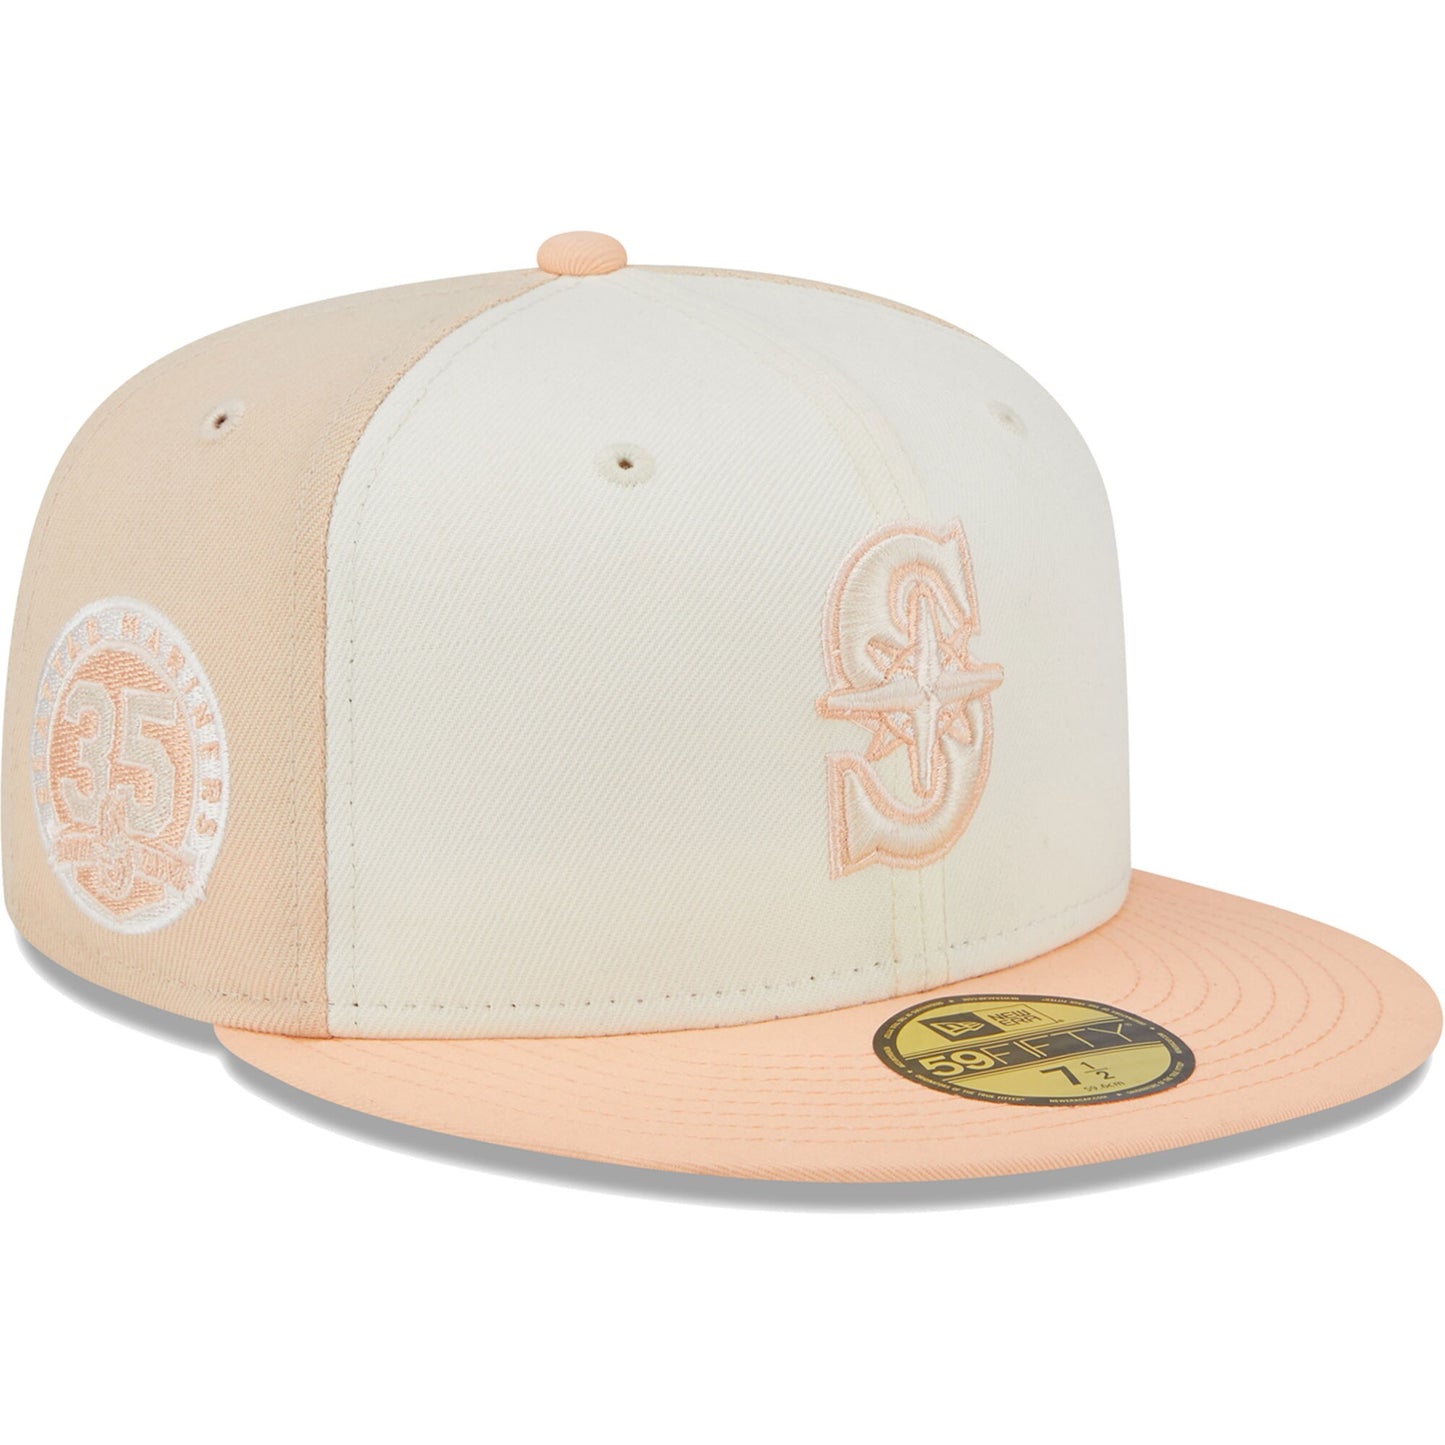 Seattle Mariners New Era Chrome Anniversary 59FIFTY Fitted Hat - Cream/Pink